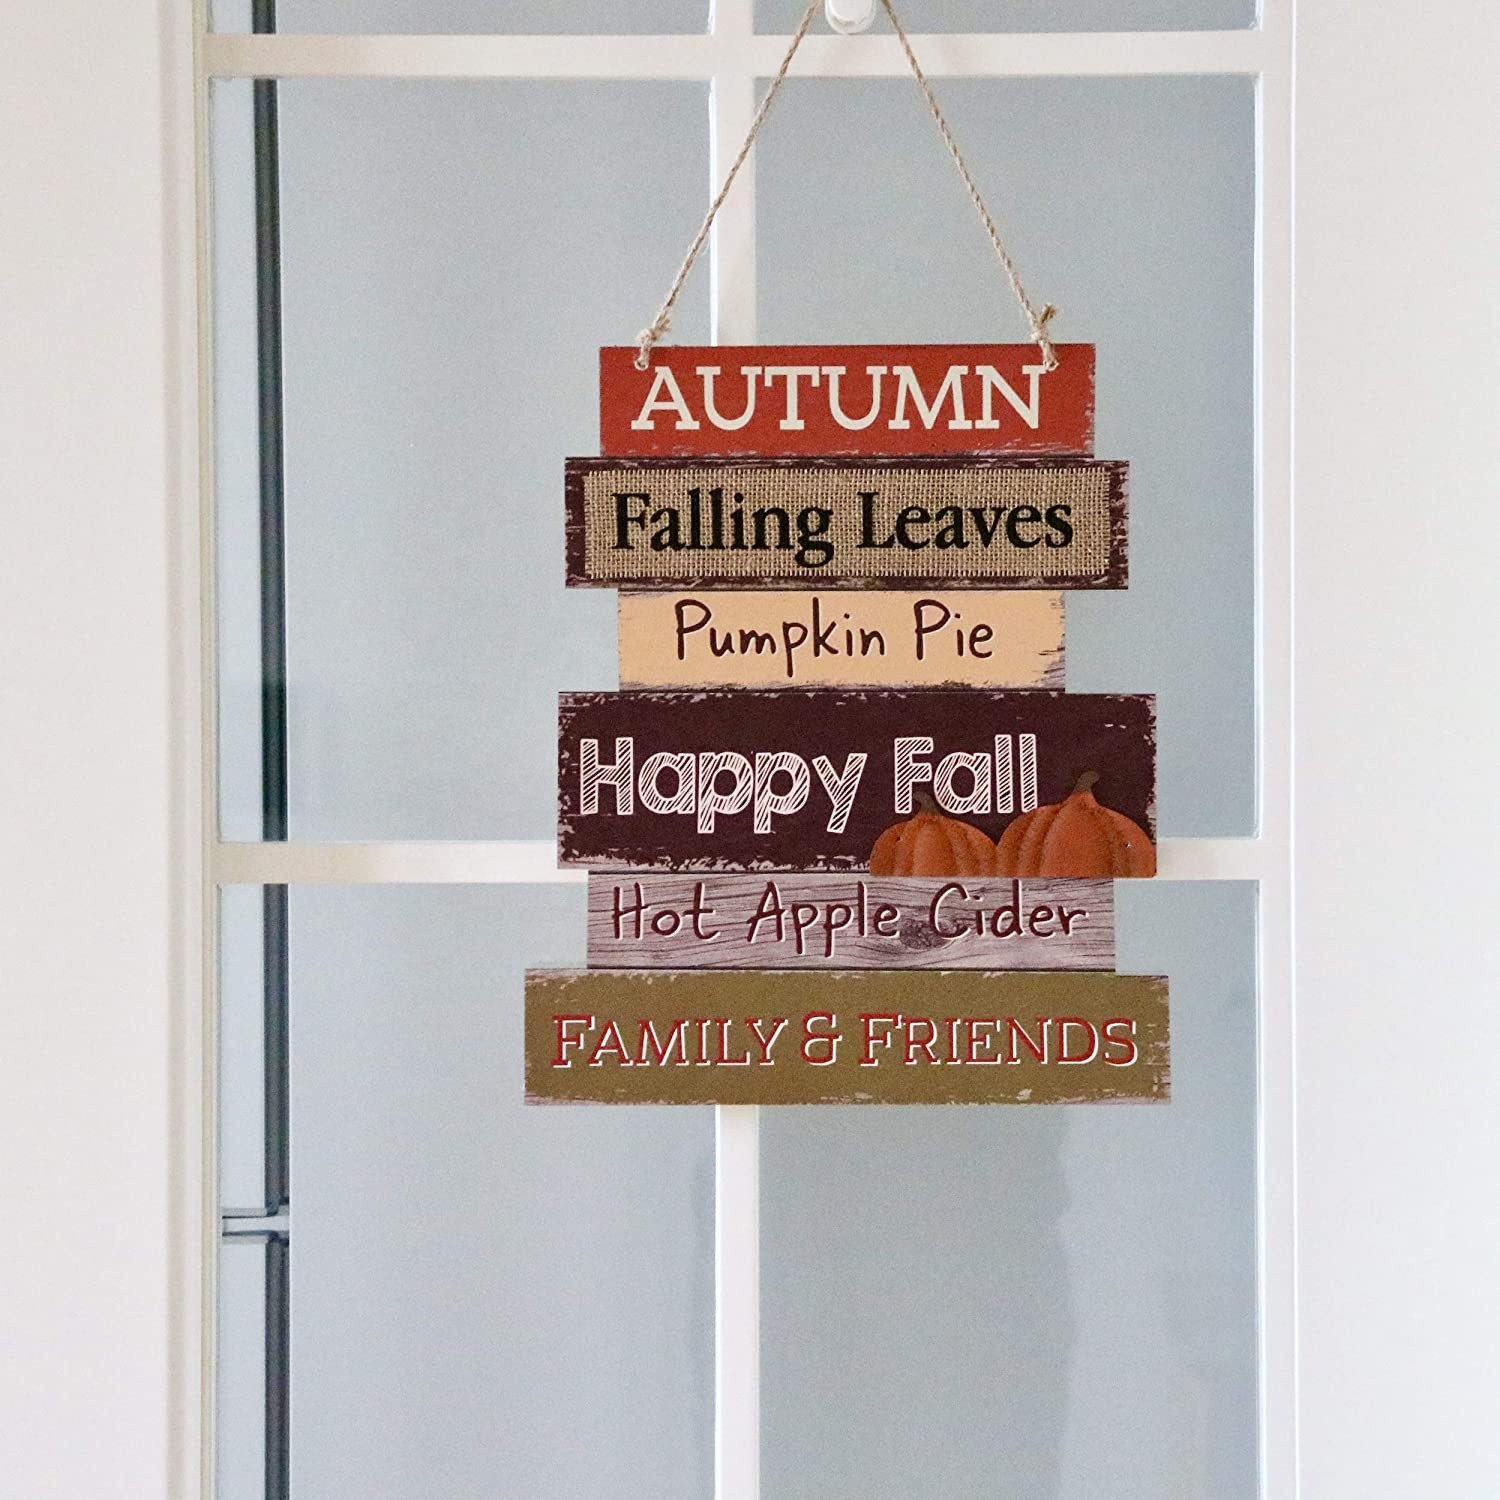 Distressed Wood Look Sign “Autumn Falling Leaves Pumpkin Pie Happy Fall” 